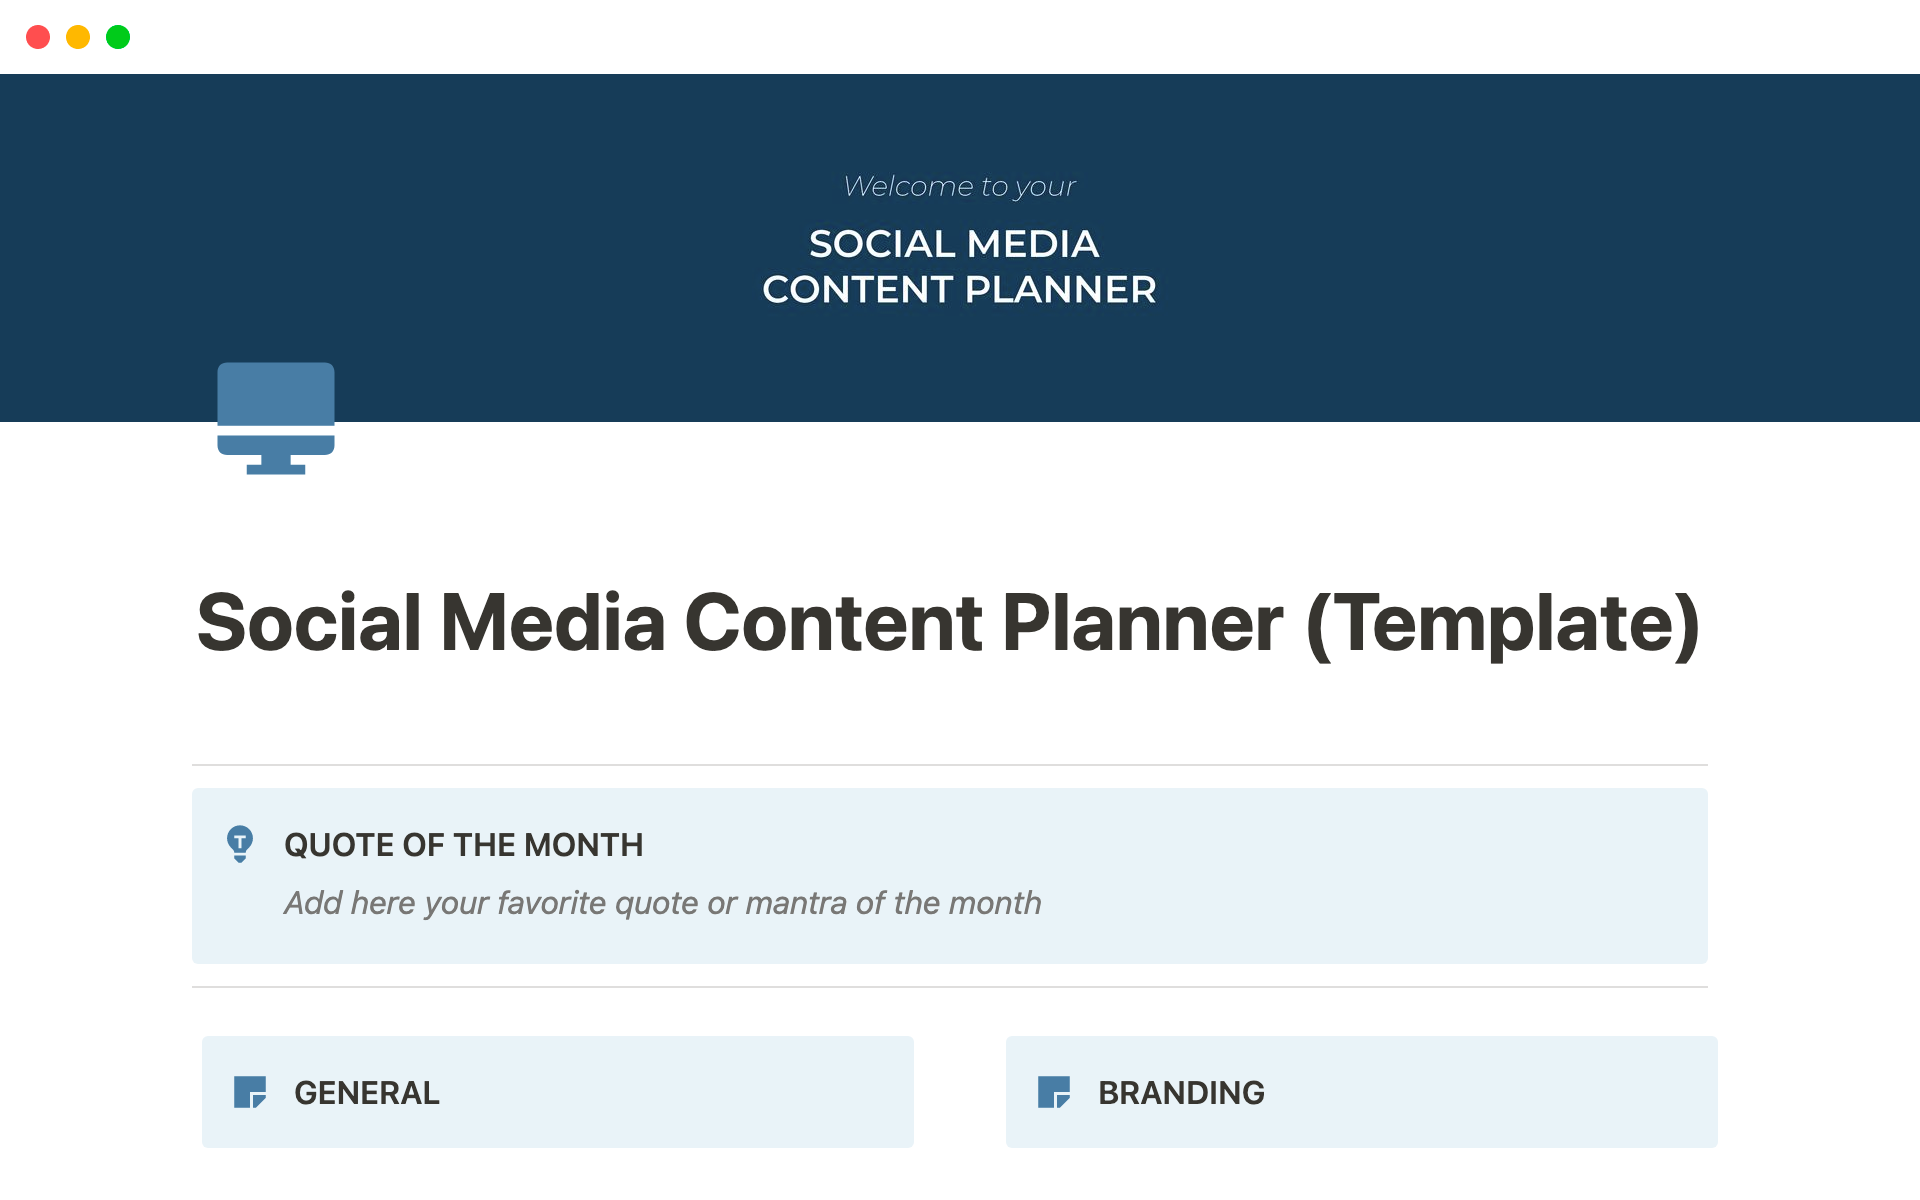 Looking to manage your social media campaigns like a pro? The Notion Social Media Content Planner is here to help!